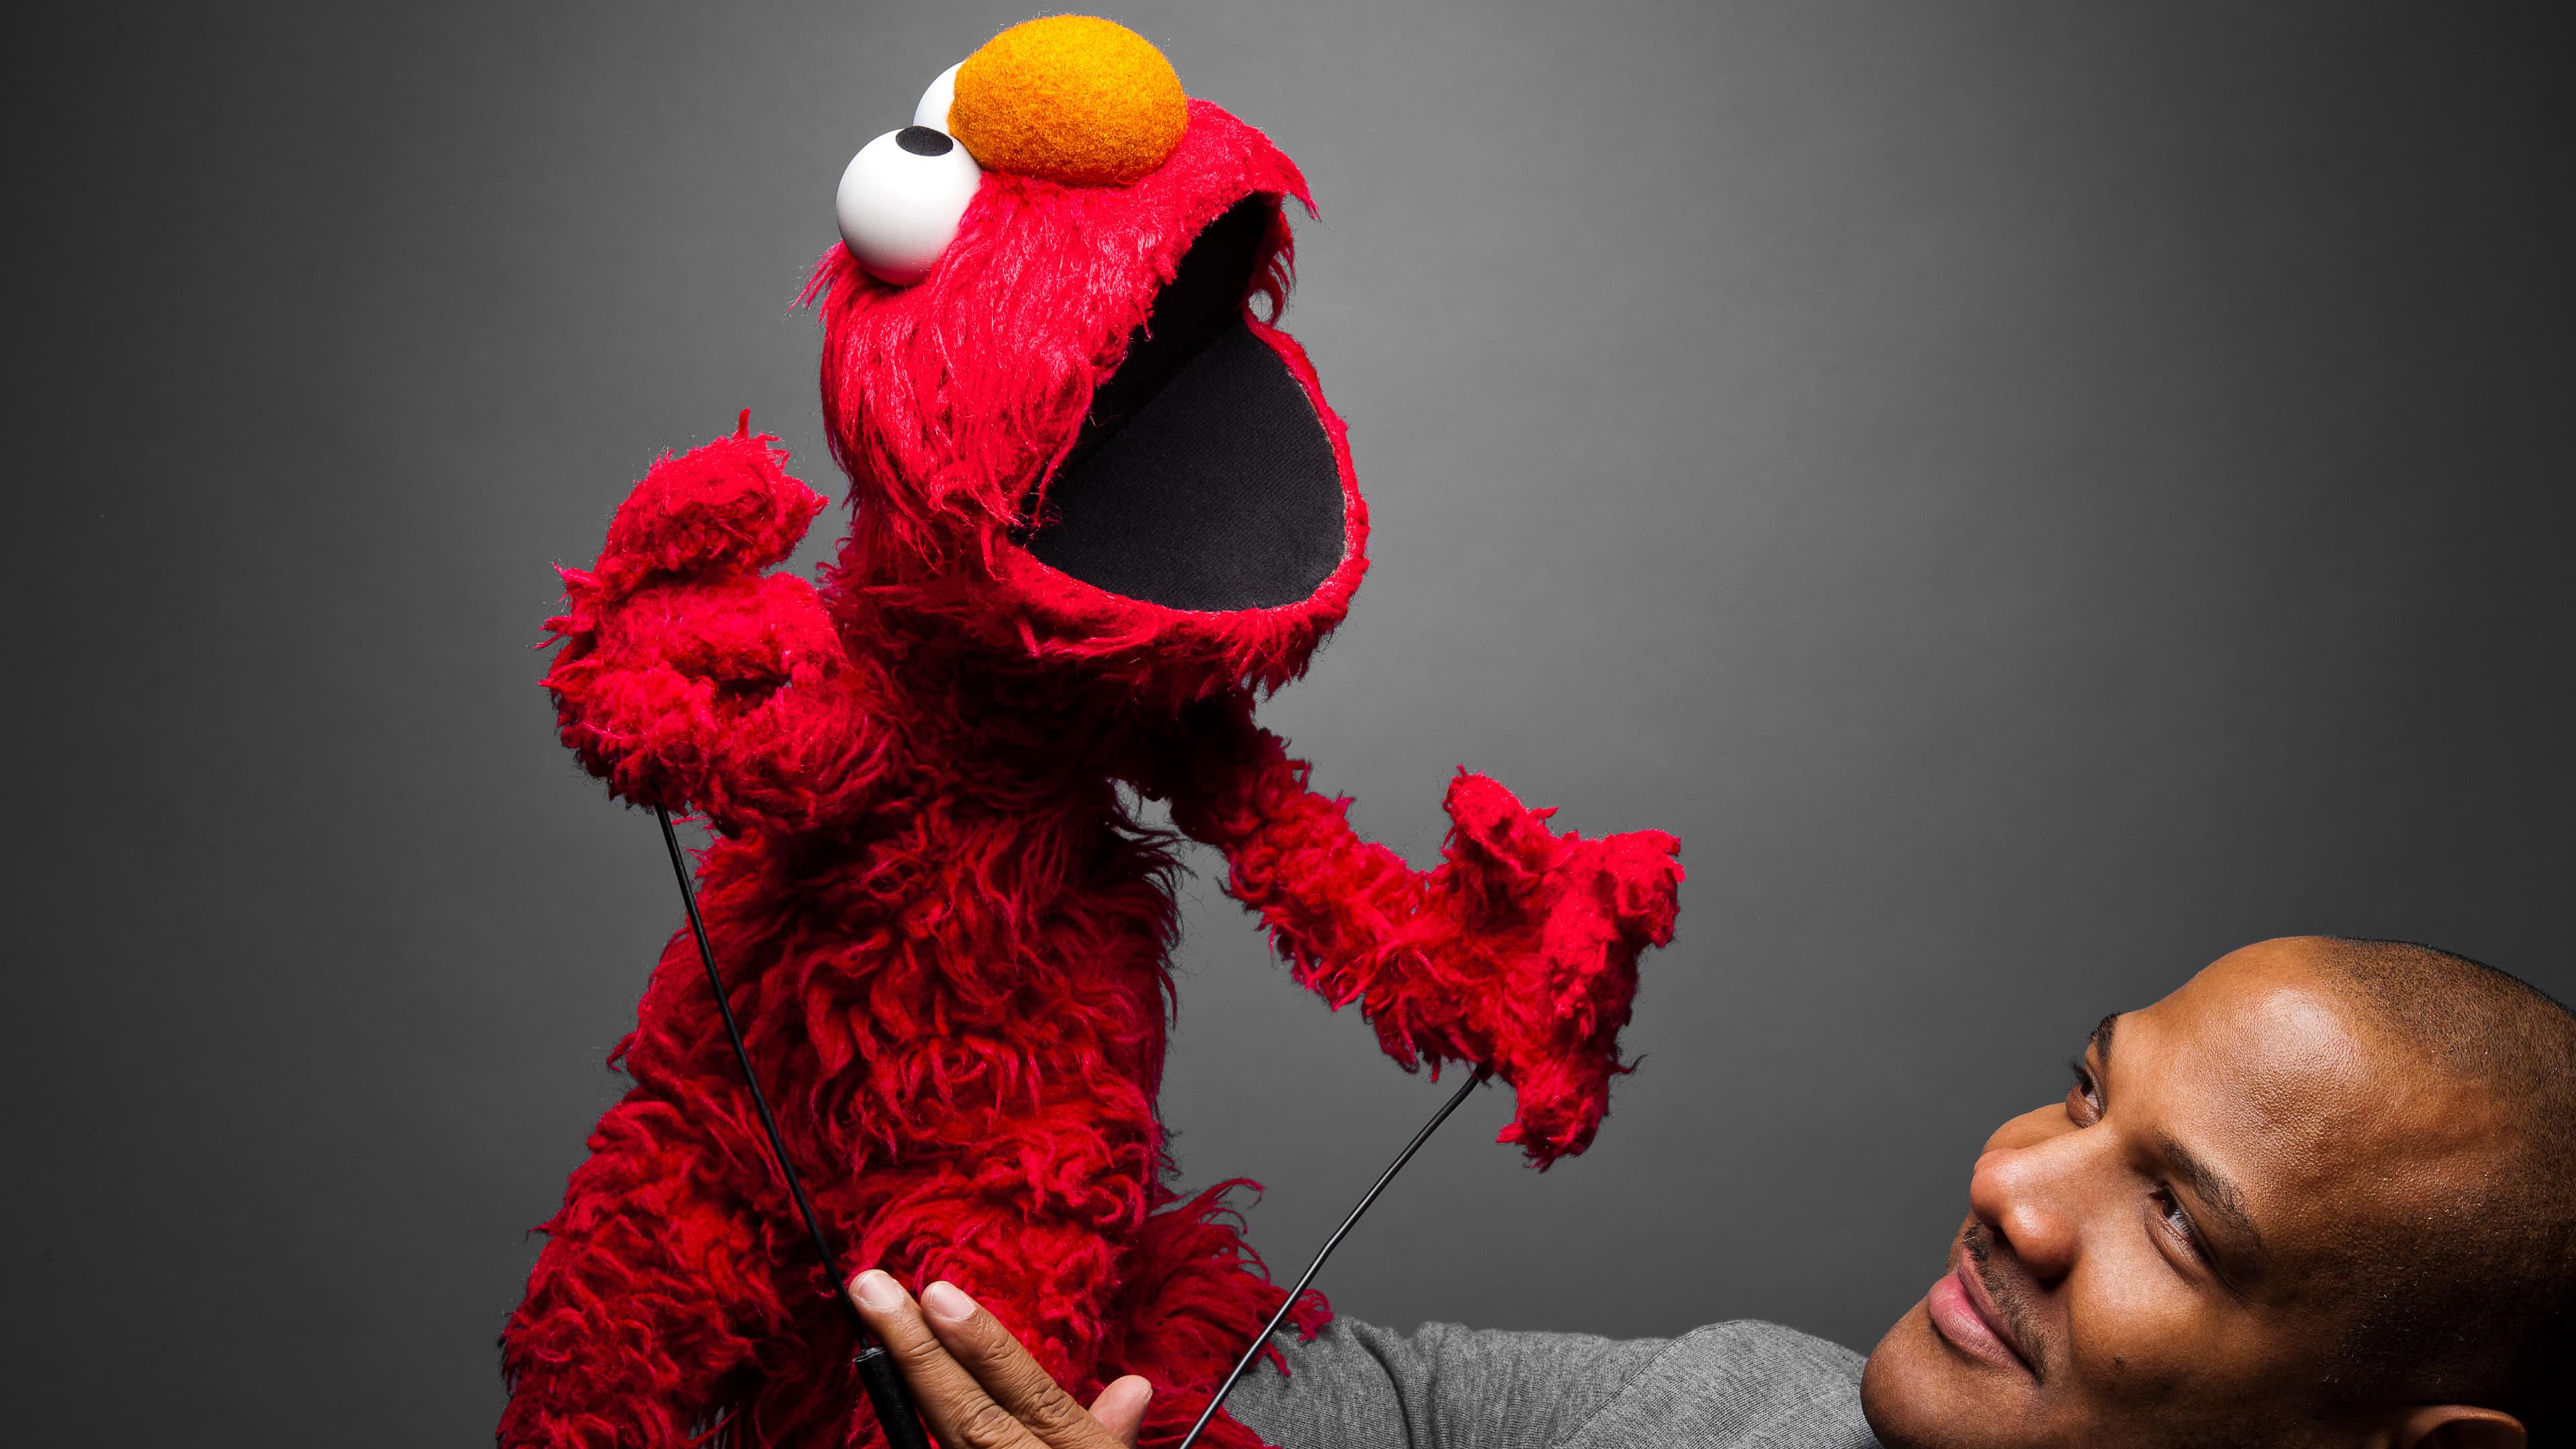 Being Elmo: A Puppeteer's Journey backdrop